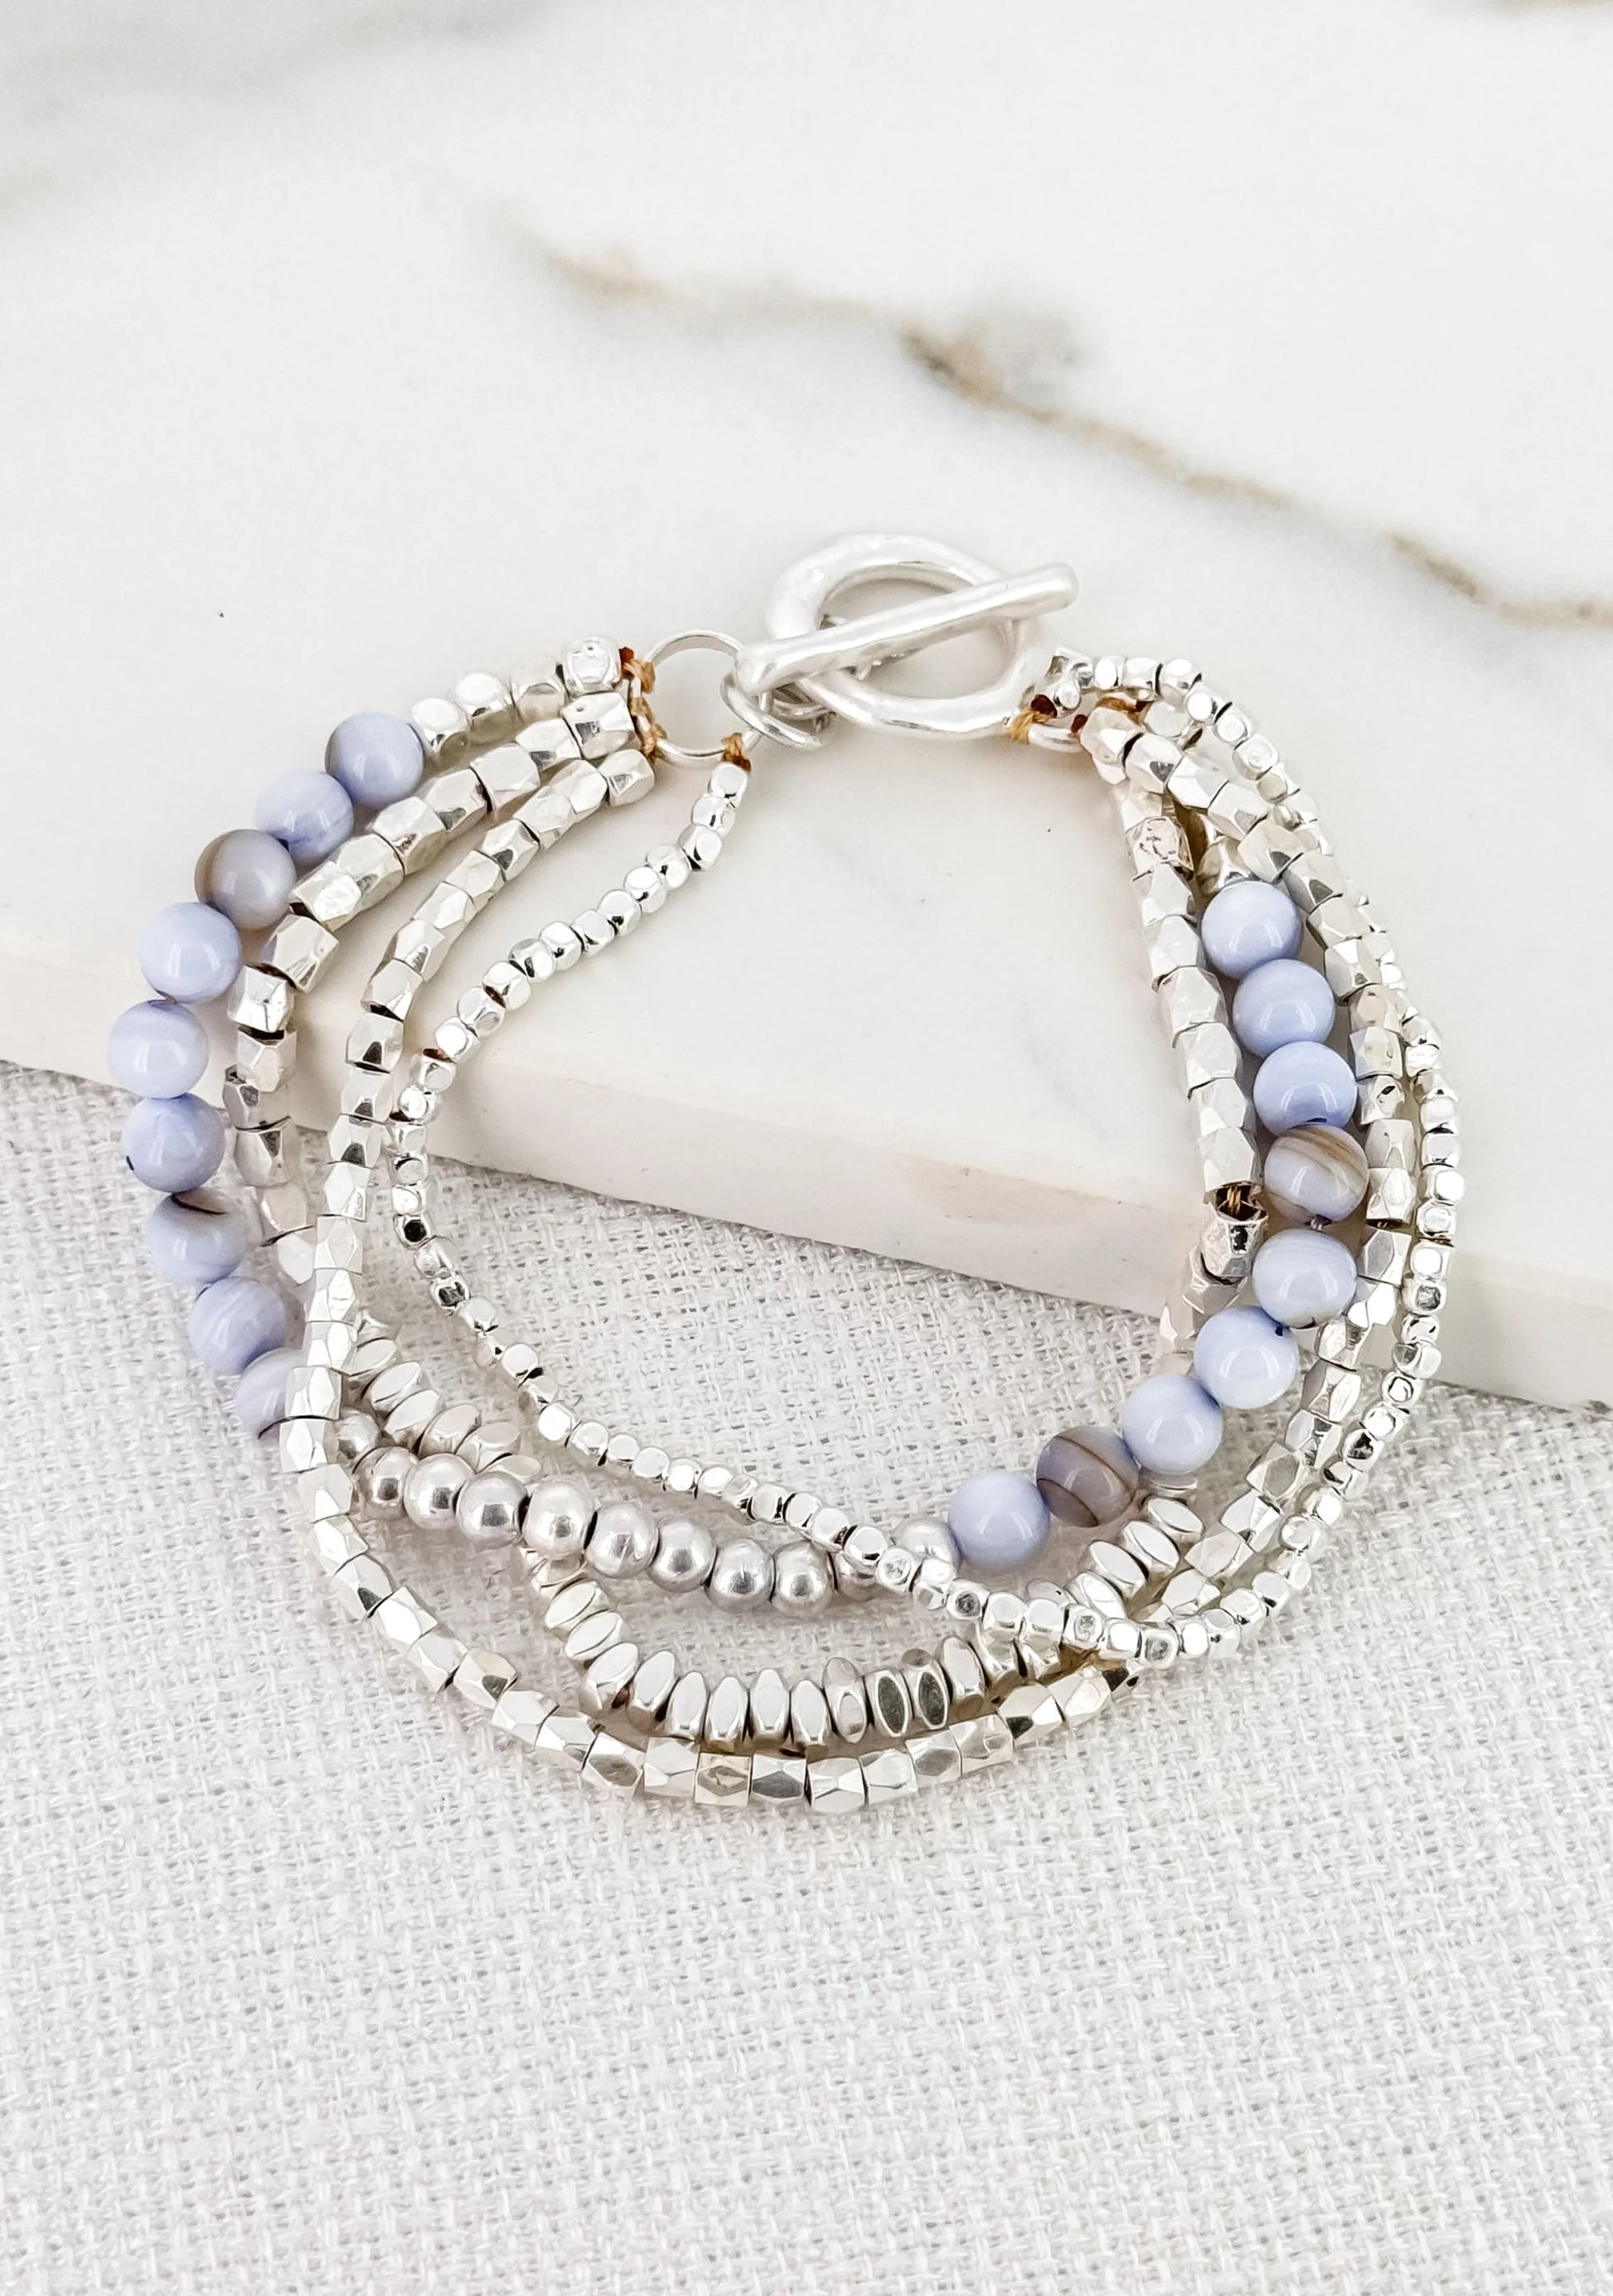 Envy Layered worn silver bracelet with blue semi precious beads and t-bar clasp